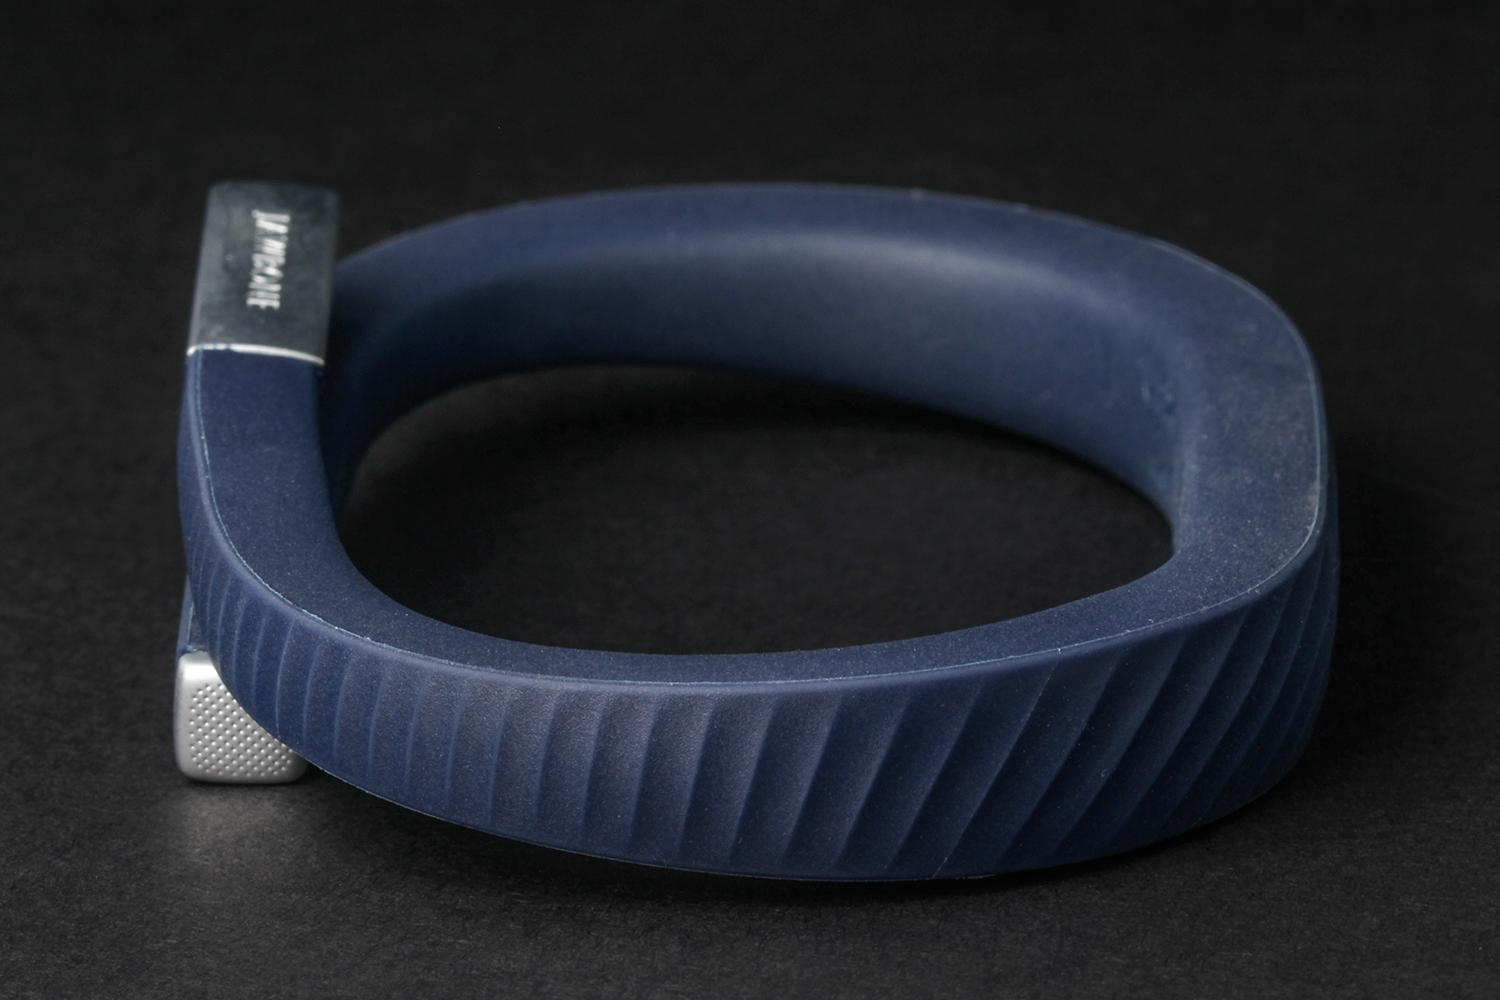 Jawbone UP3 Fitness Band - Buy Jawbone UP3 Fitness Band Online at Best  Prices in India - All Types of General Sports | Flipkart.com